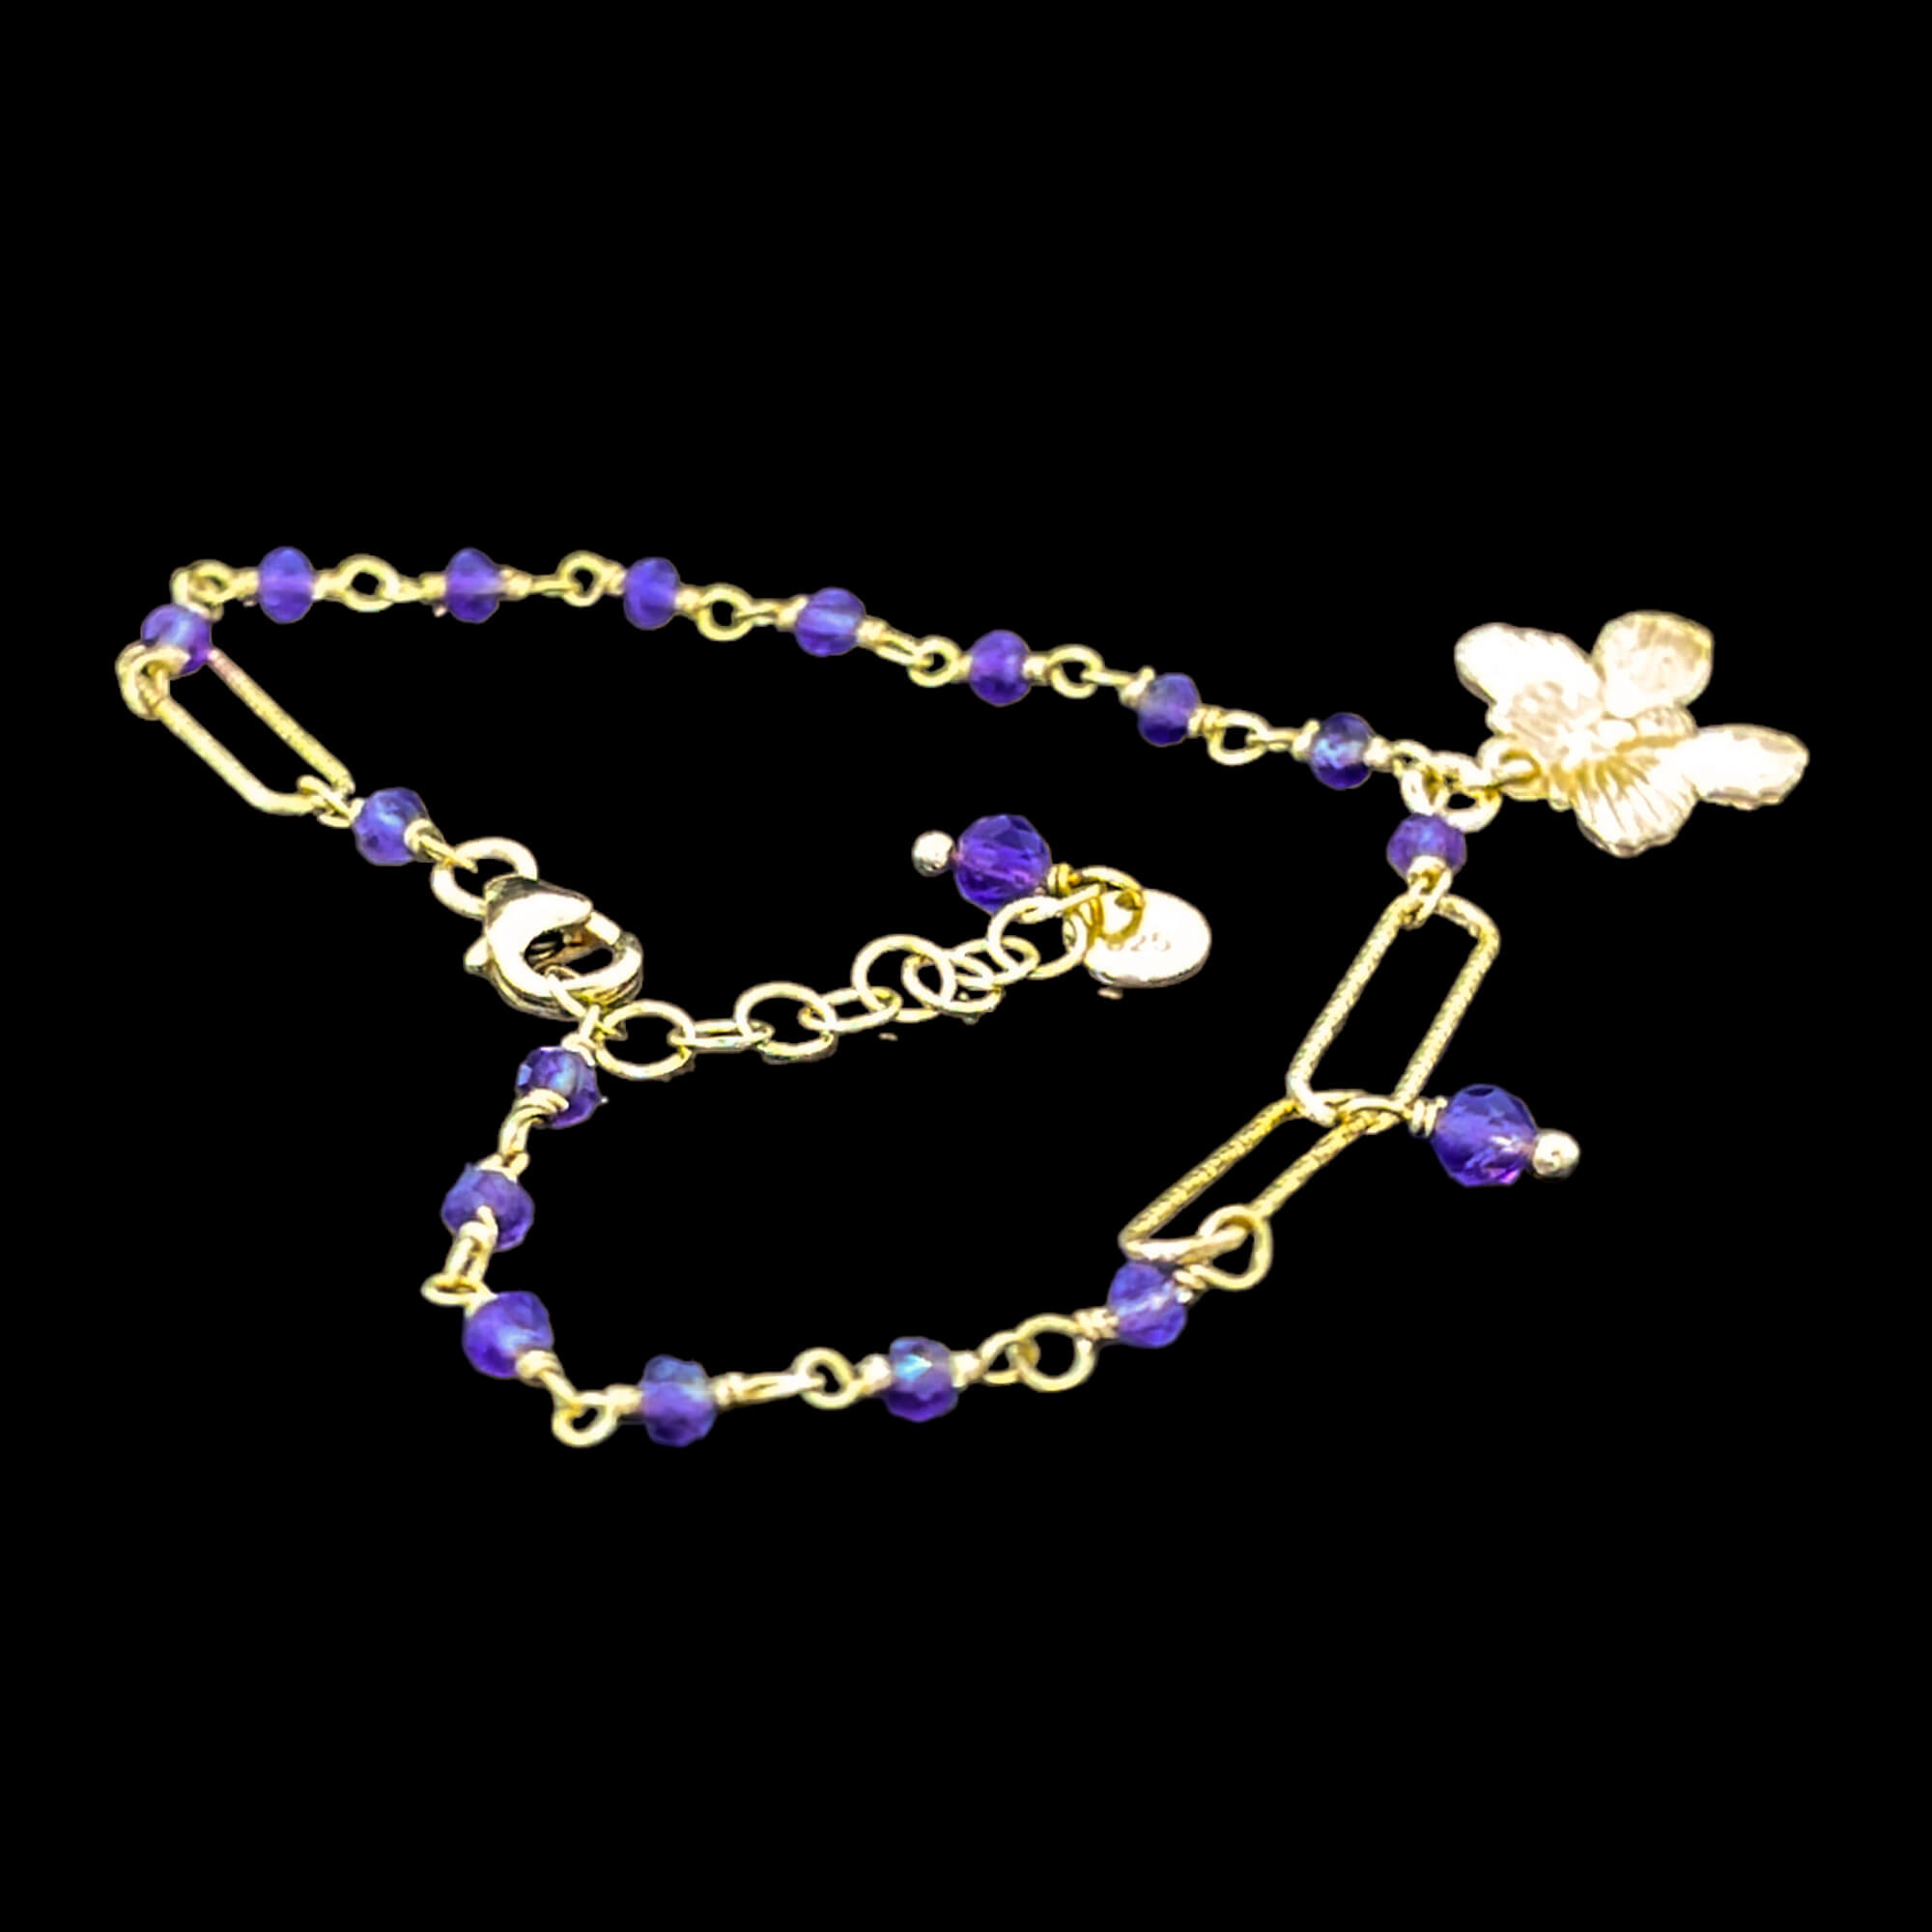 Gold-plated bracelet with amethyst stones and a butterfly